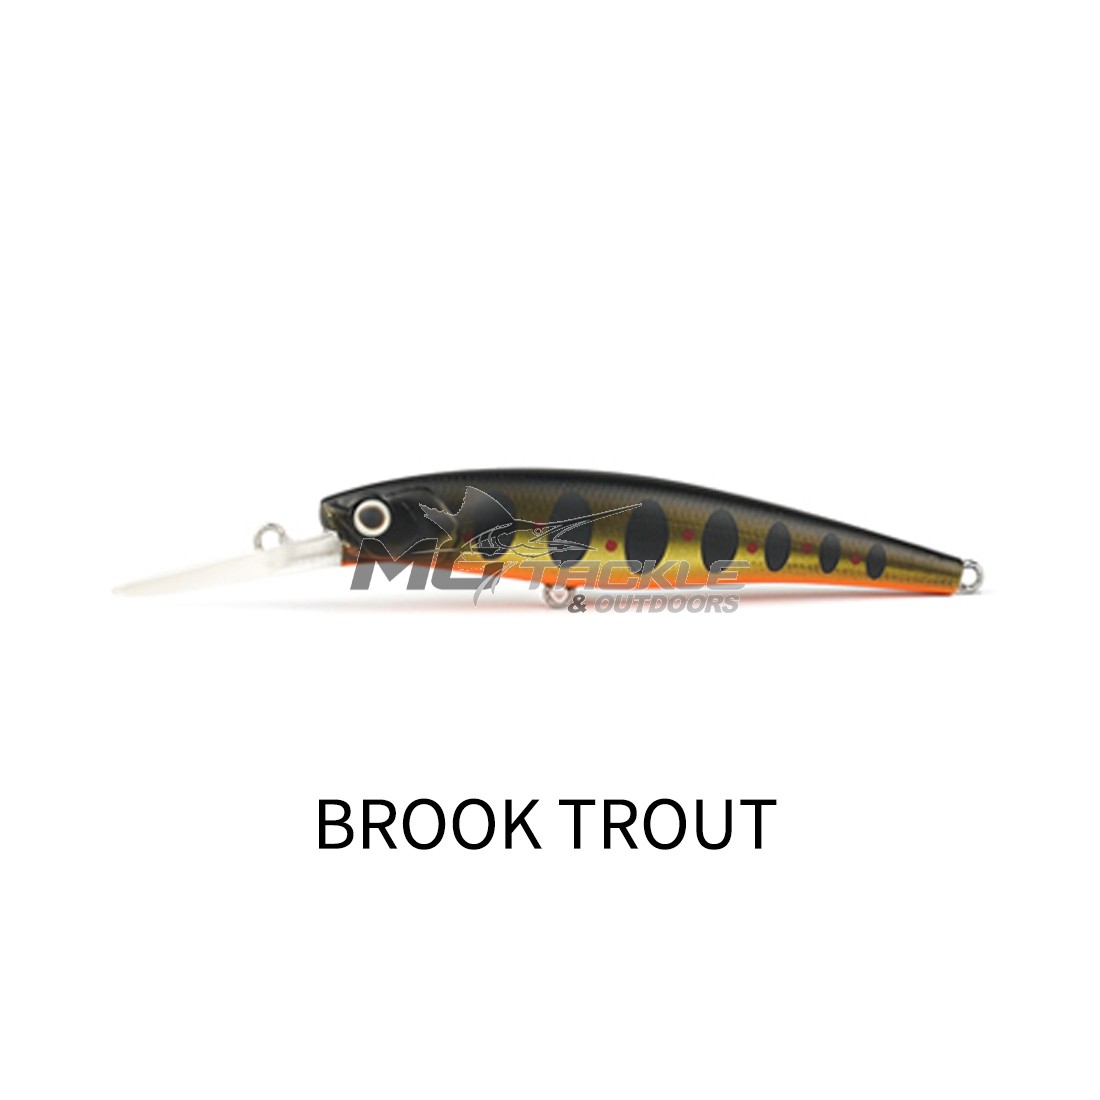 Pro Lure Crank  MoTackle & Outdoors